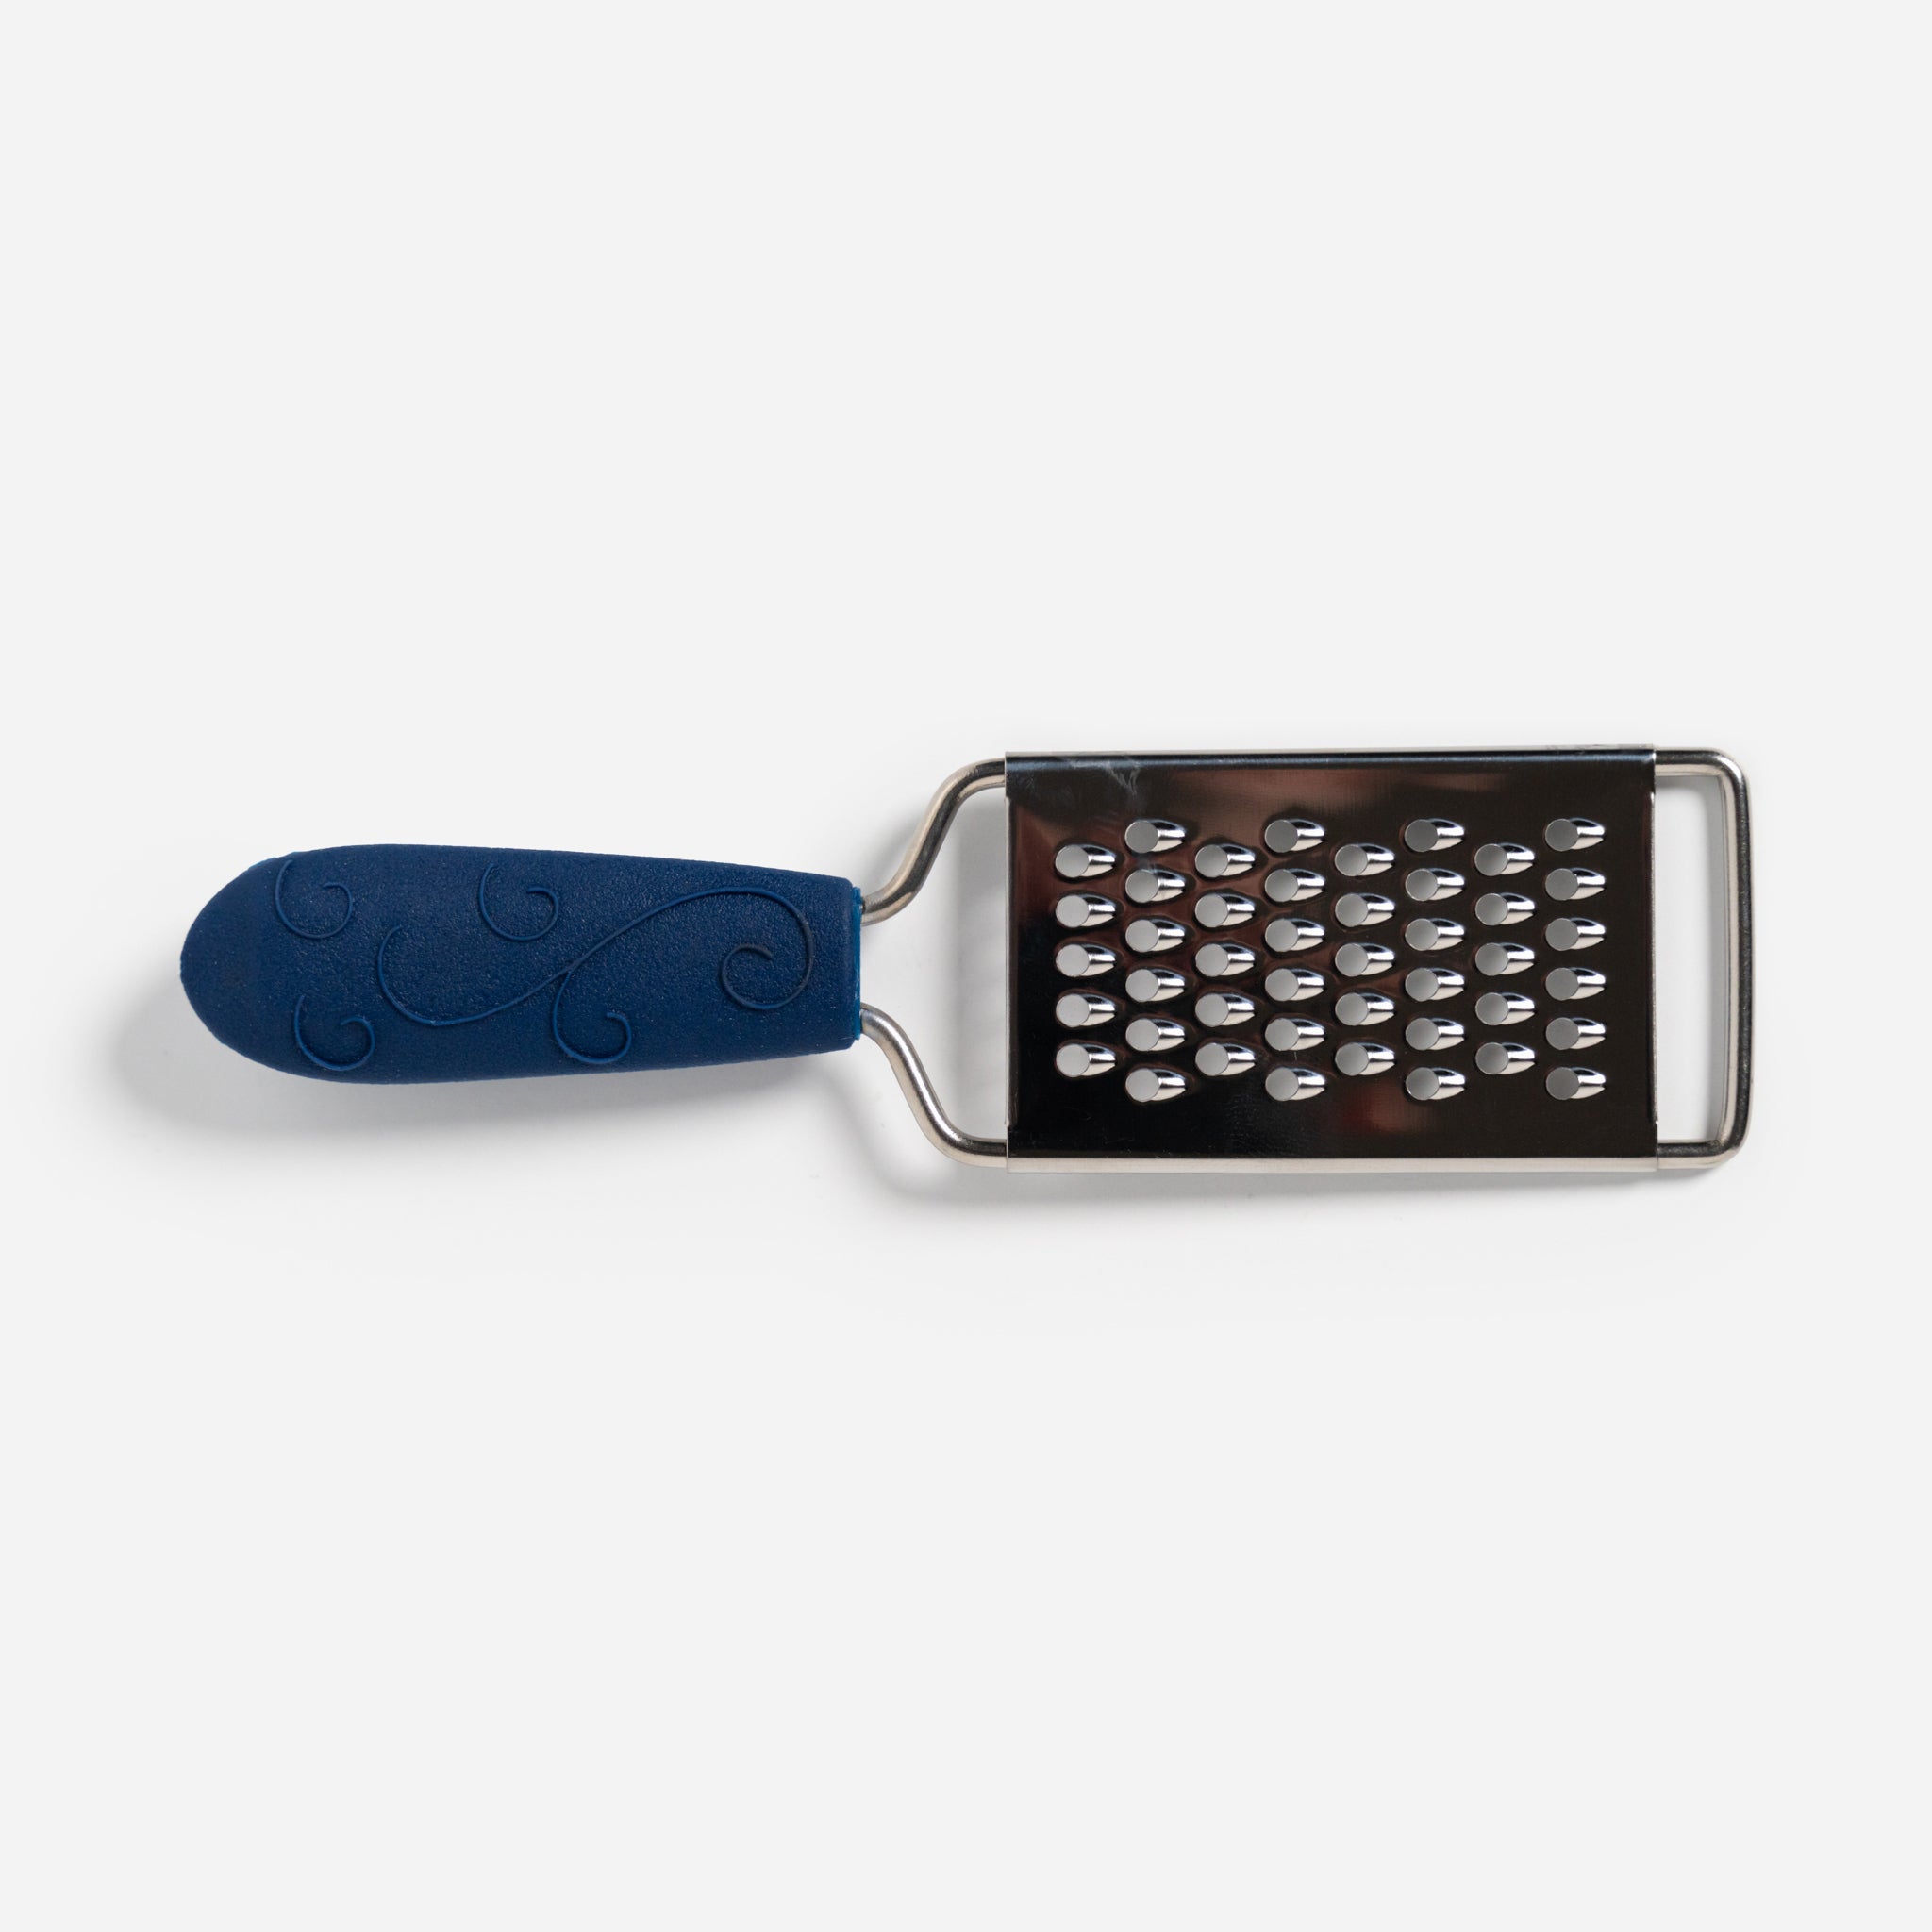 Mini Cheese Grater – This & That Props Inc